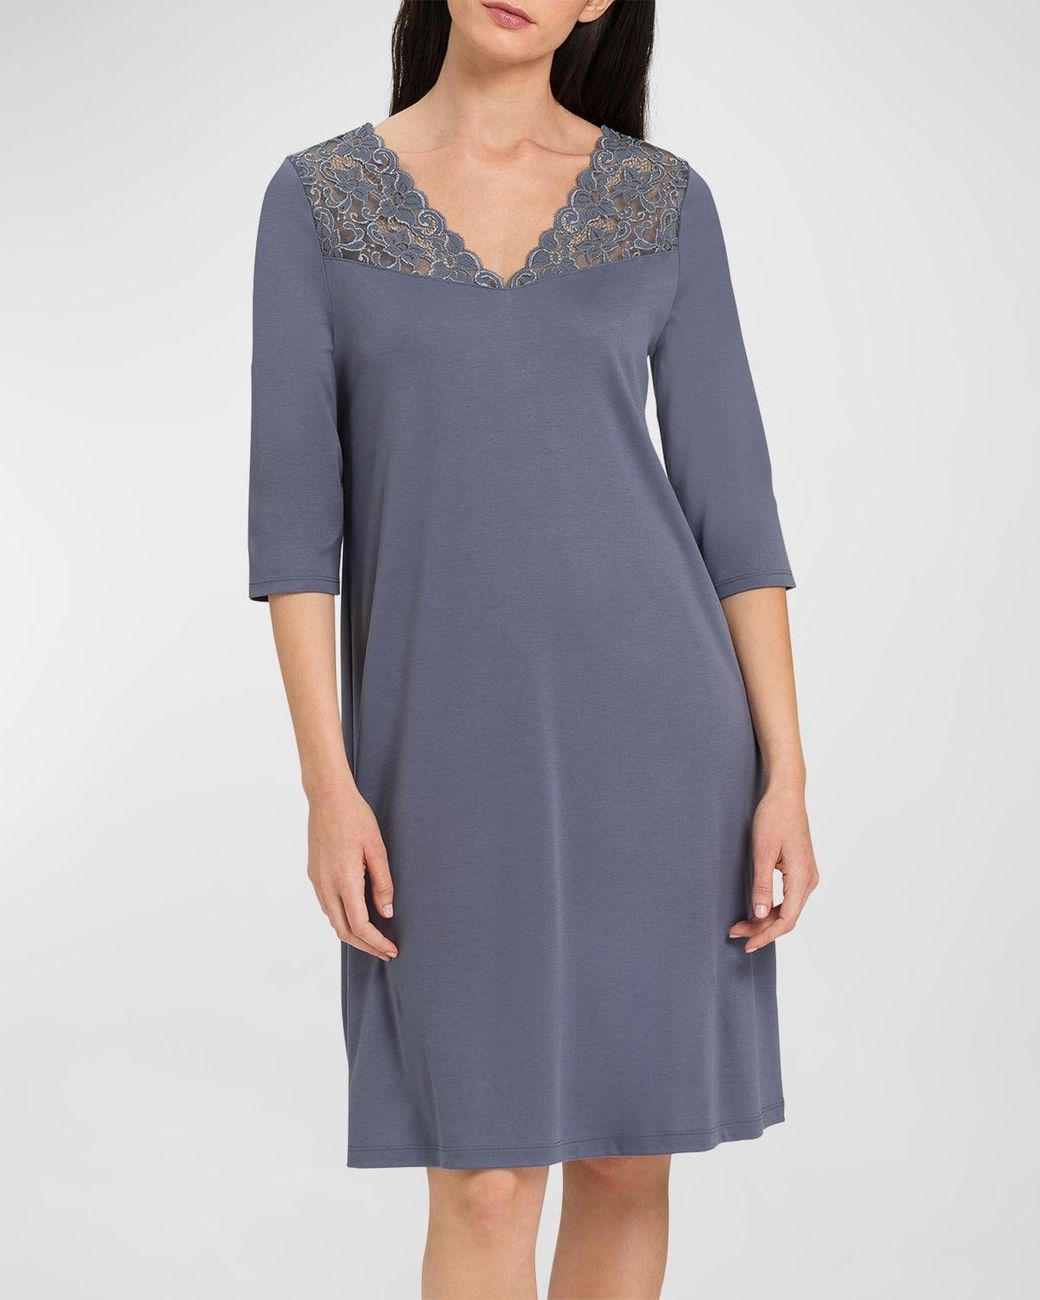 Hanro Moments 3/4 Sleeve Nightgown in Gray | Lyst